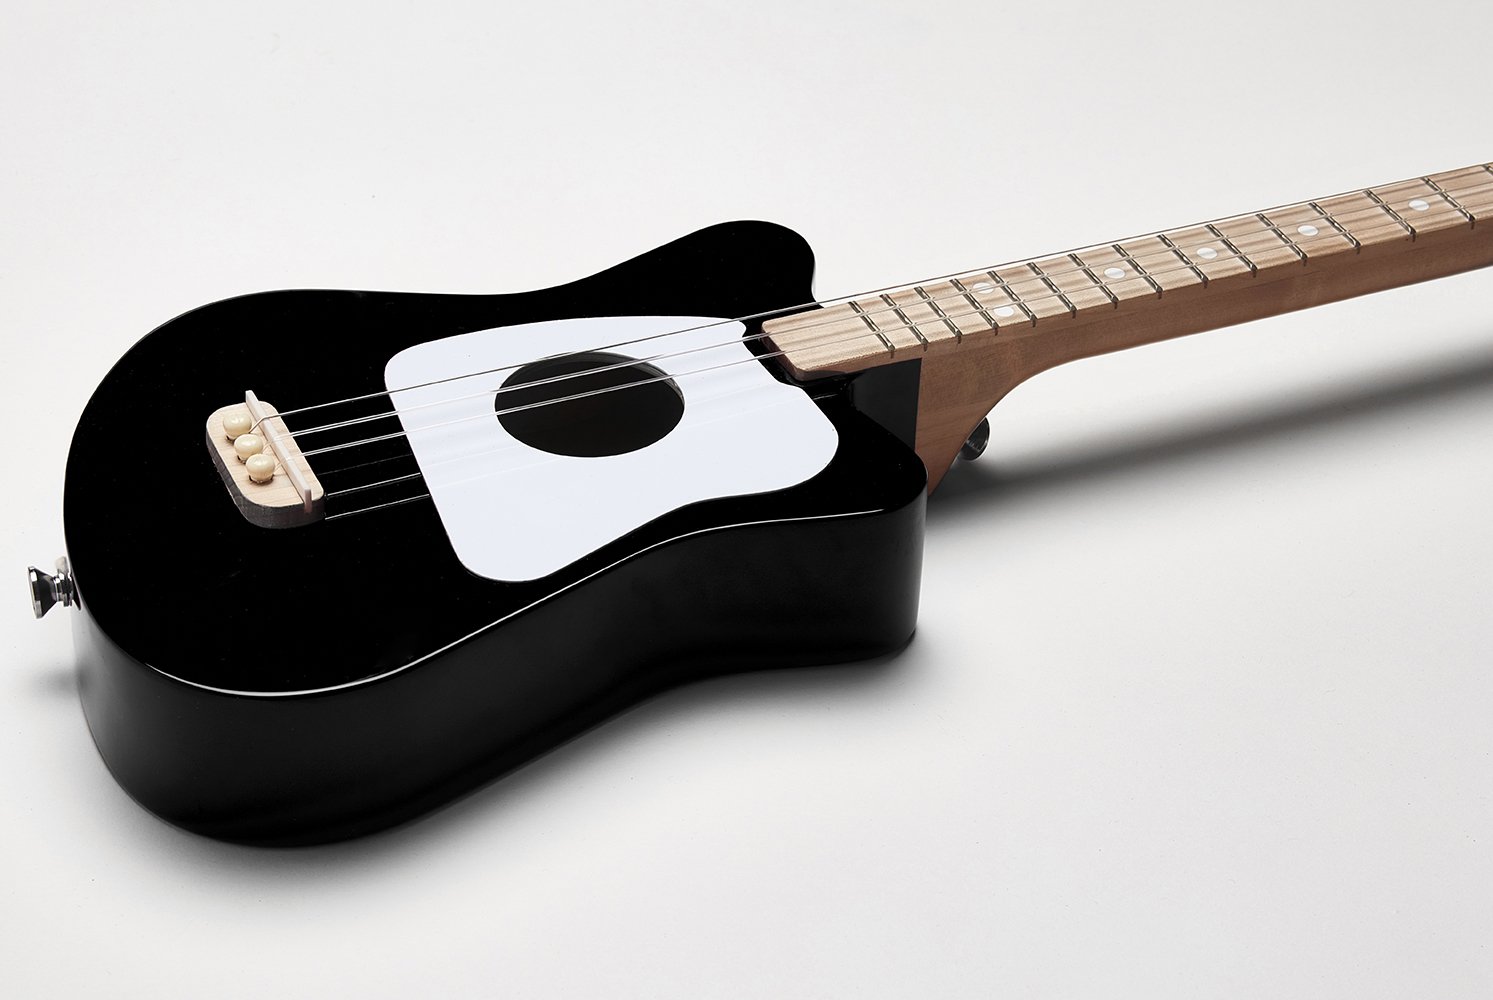 Loog Mini Acoustic Guitar for Children and Beginners With the 3-string  - Black (Like New, Open Retail Box)